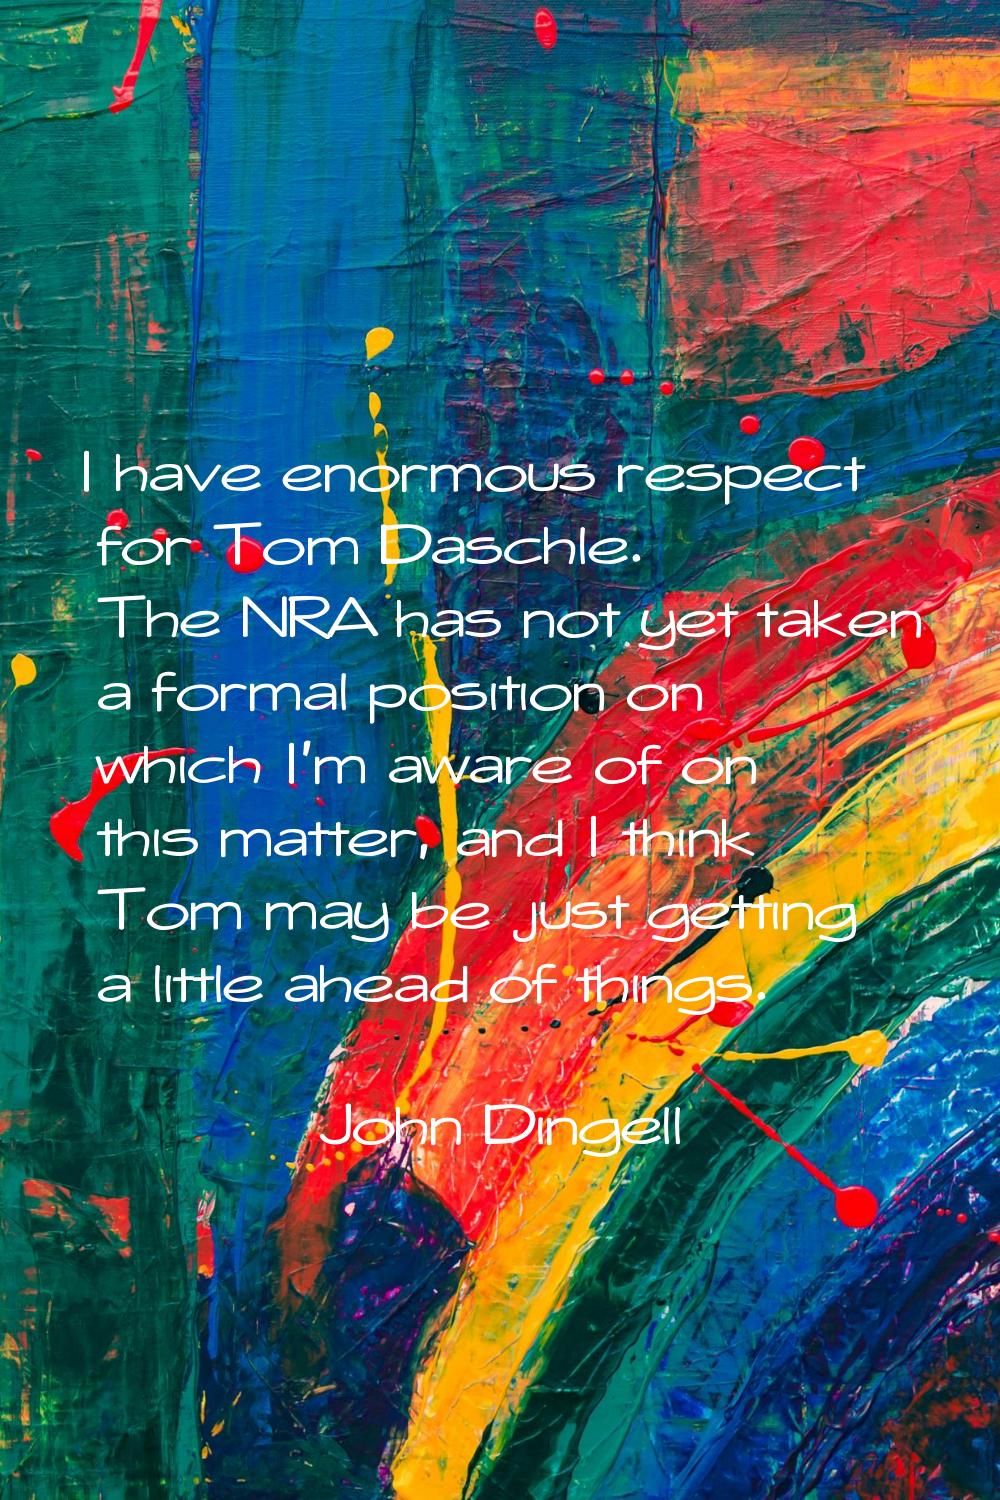 I have enormous respect for Tom Daschle. The NRA has not yet taken a formal position on which I'm a